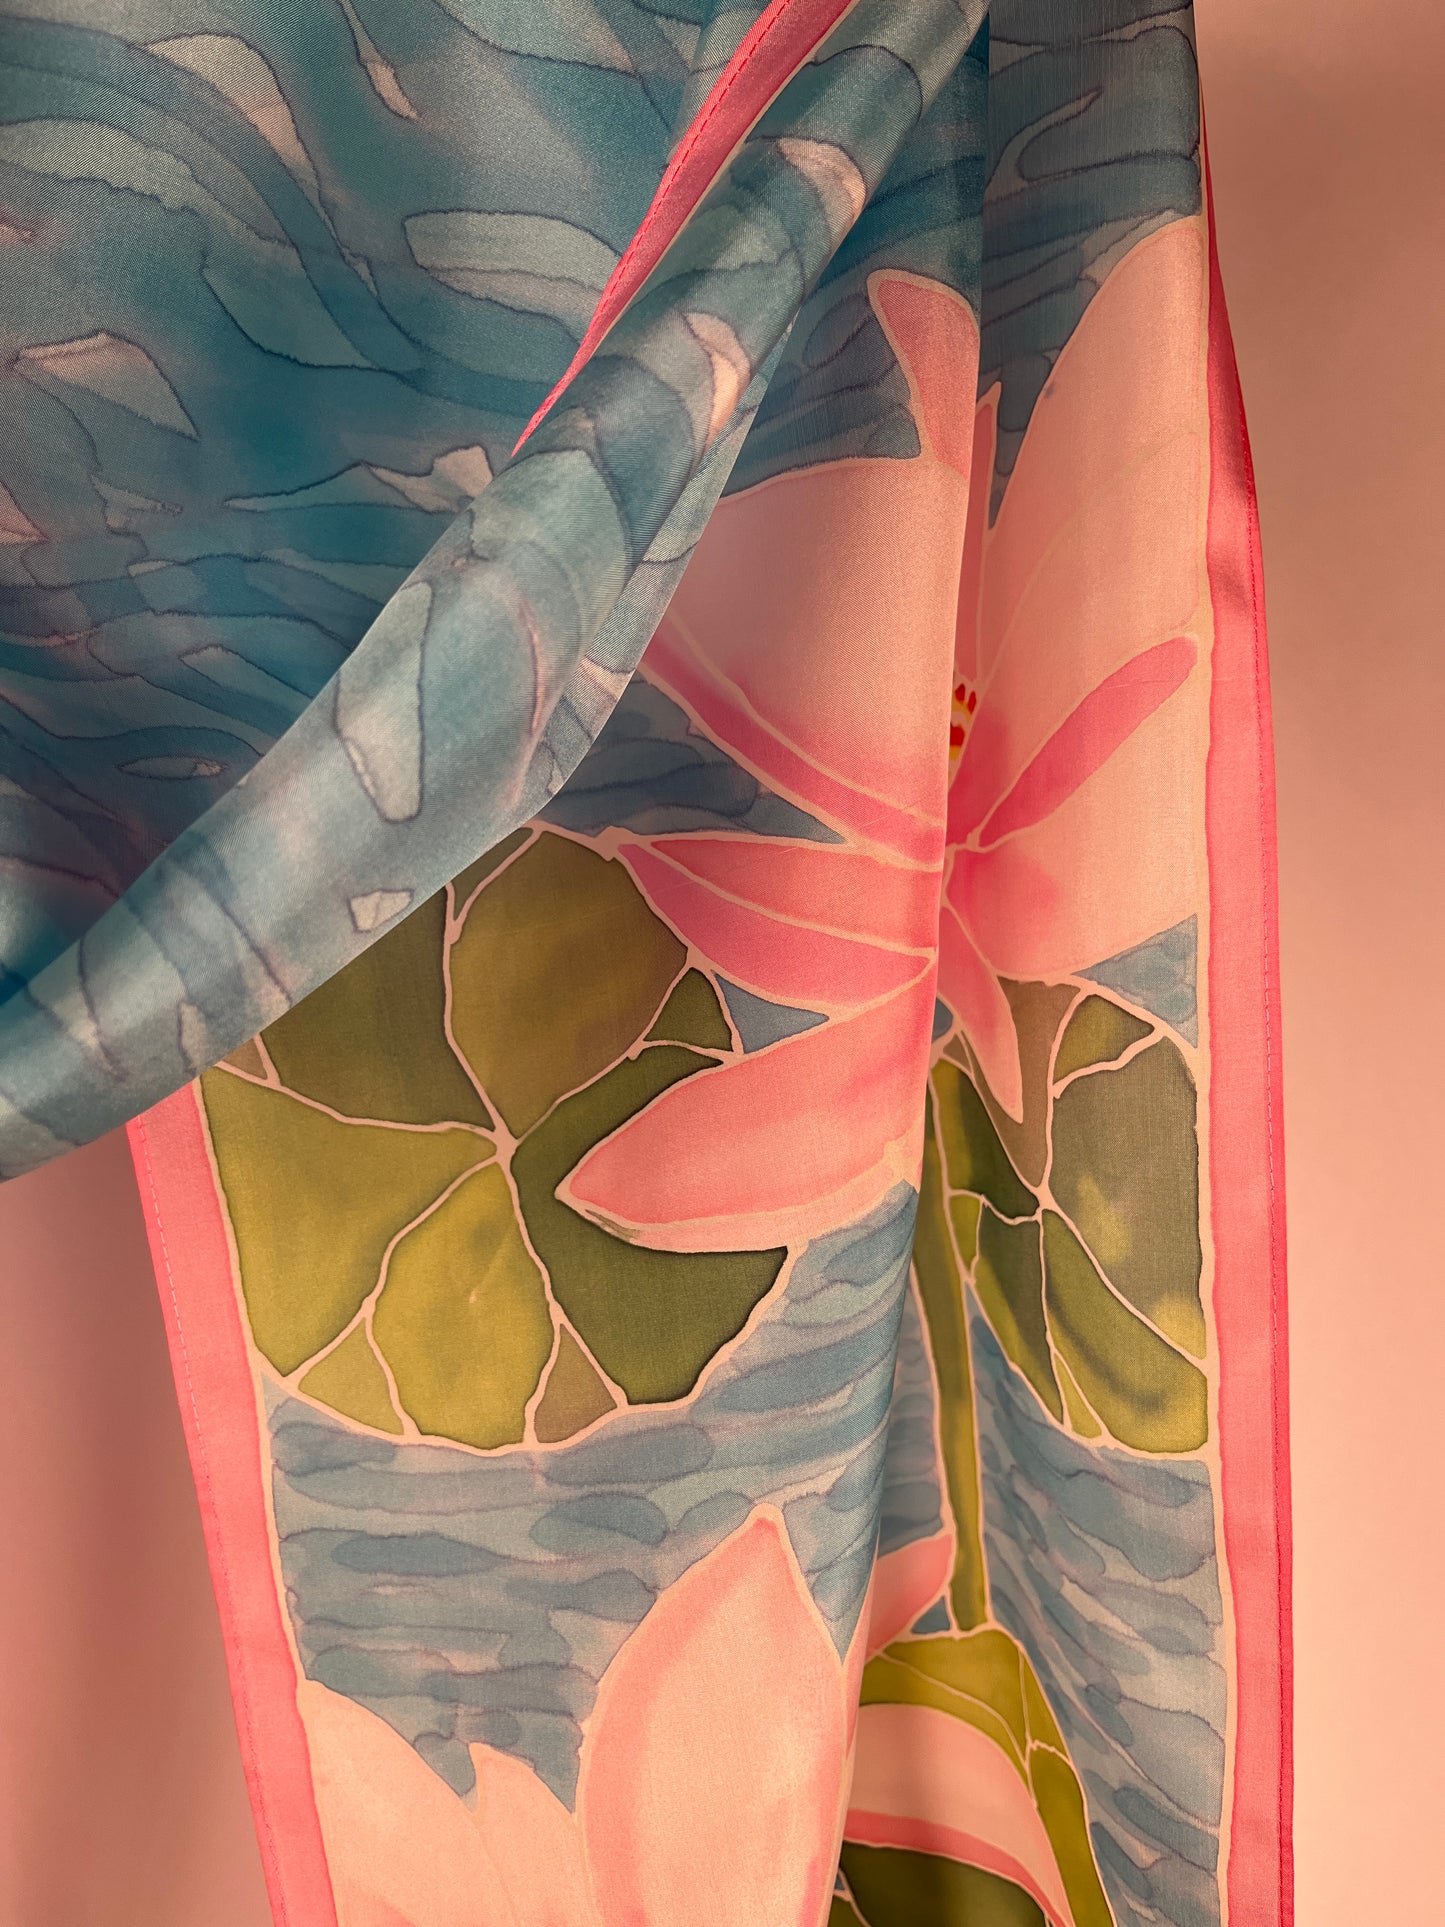 “Water Lilies” Hand-dyed Silk Scarf - $135